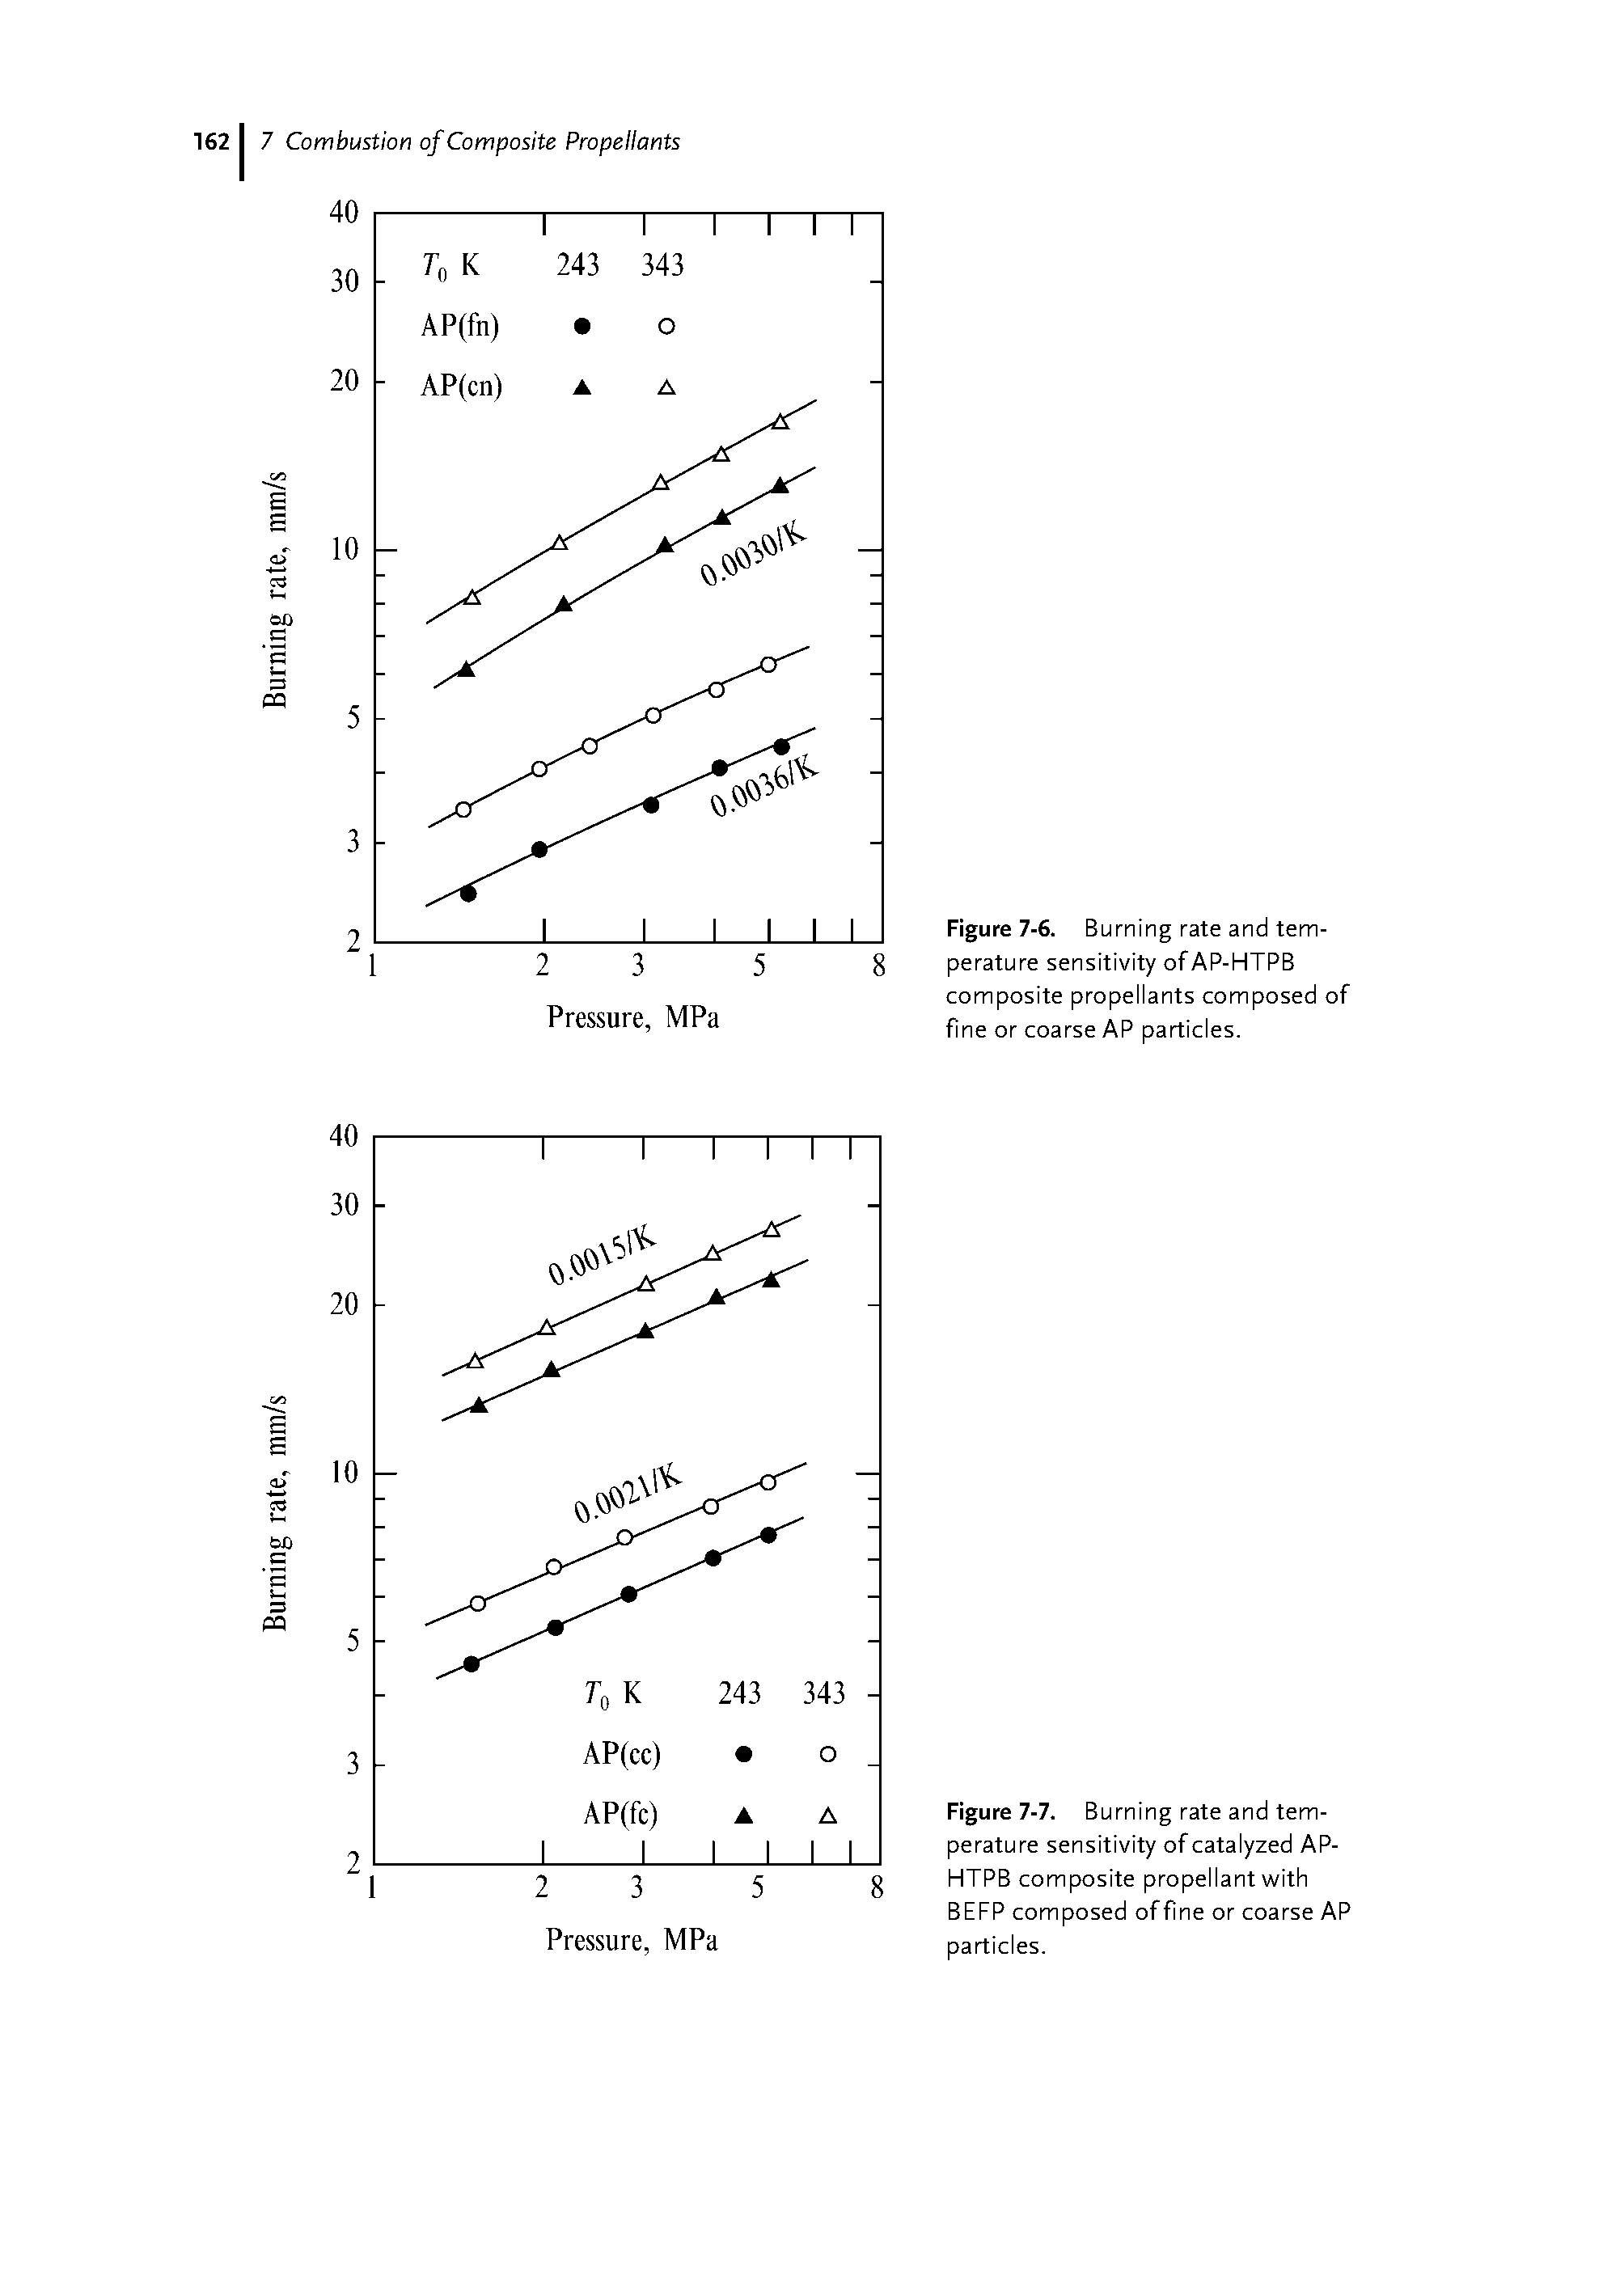 Figure 7-6. Burning rate and temperature sensitivity of AP-HTPB composite propellants composed of fine or coarse AP particles.